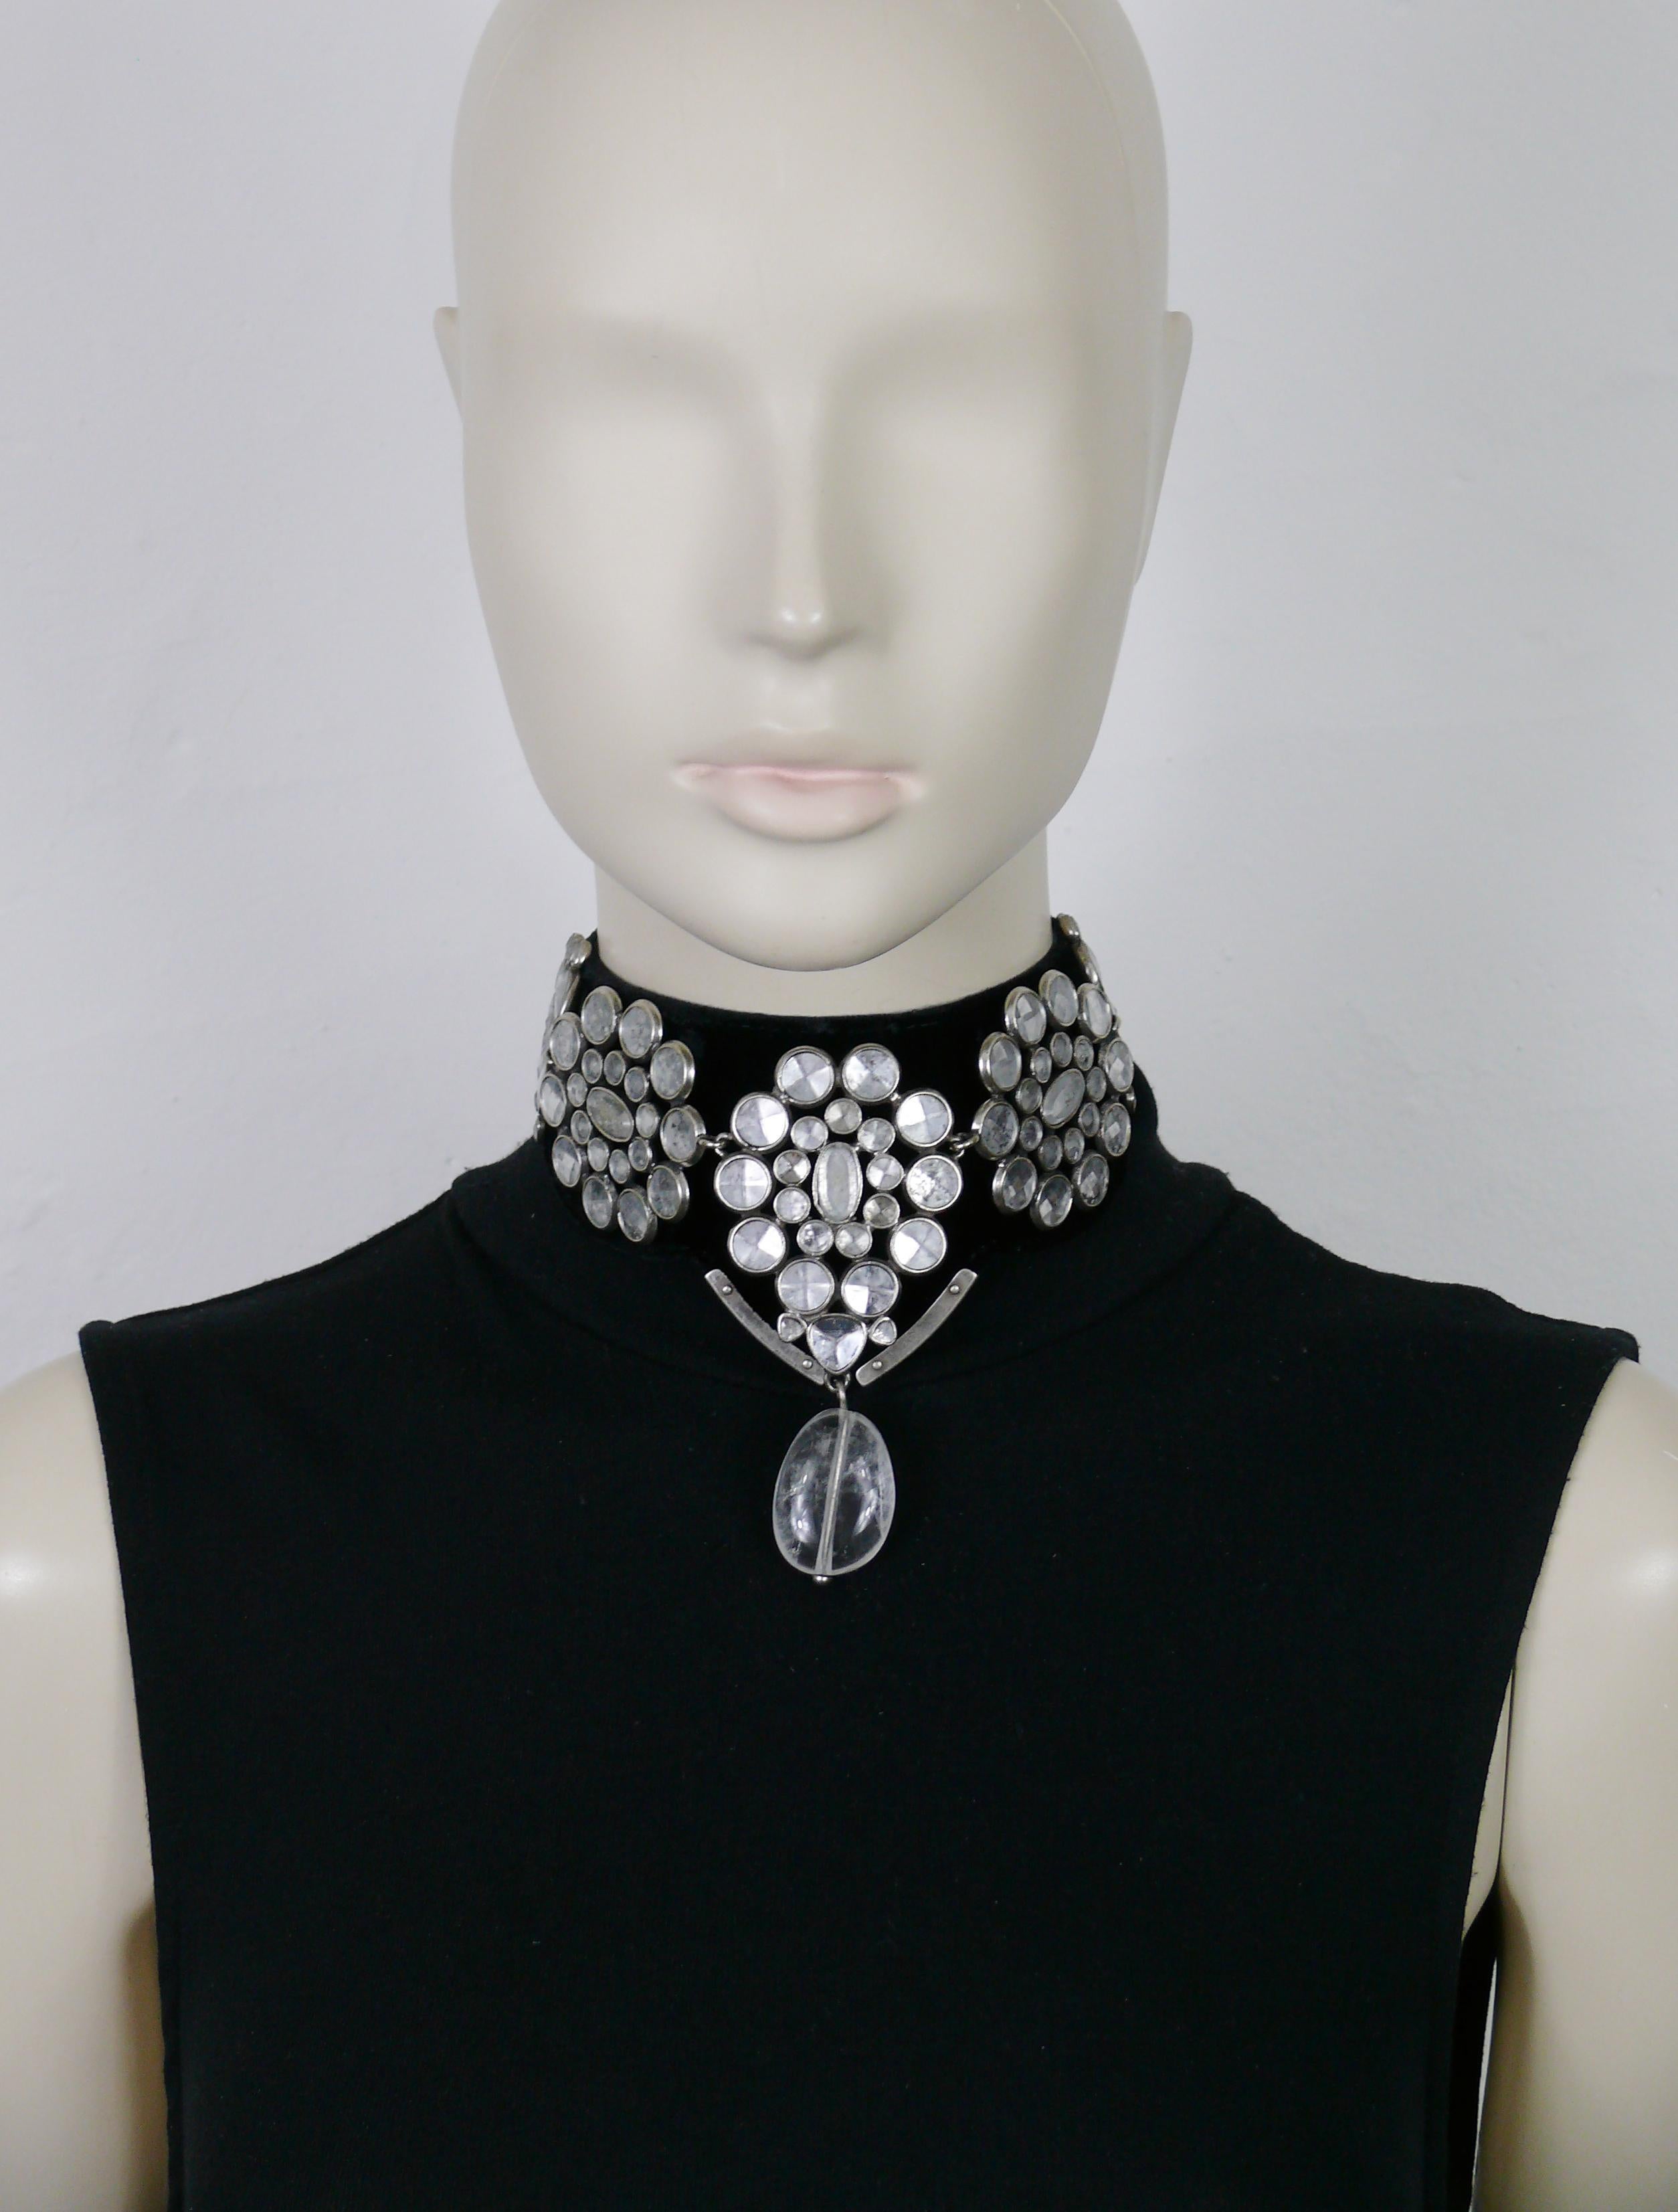 YVES SAINT LAURENT RIVE GAUCHE by TOM FORD black velvet choker necklace featuring antiqued silver toned elements embellished with acrylic aged effect prims and a rock crystal drop. 

YVES SAINT LAURENT Fall/Winter 2002 collection.

Velvet ribbons